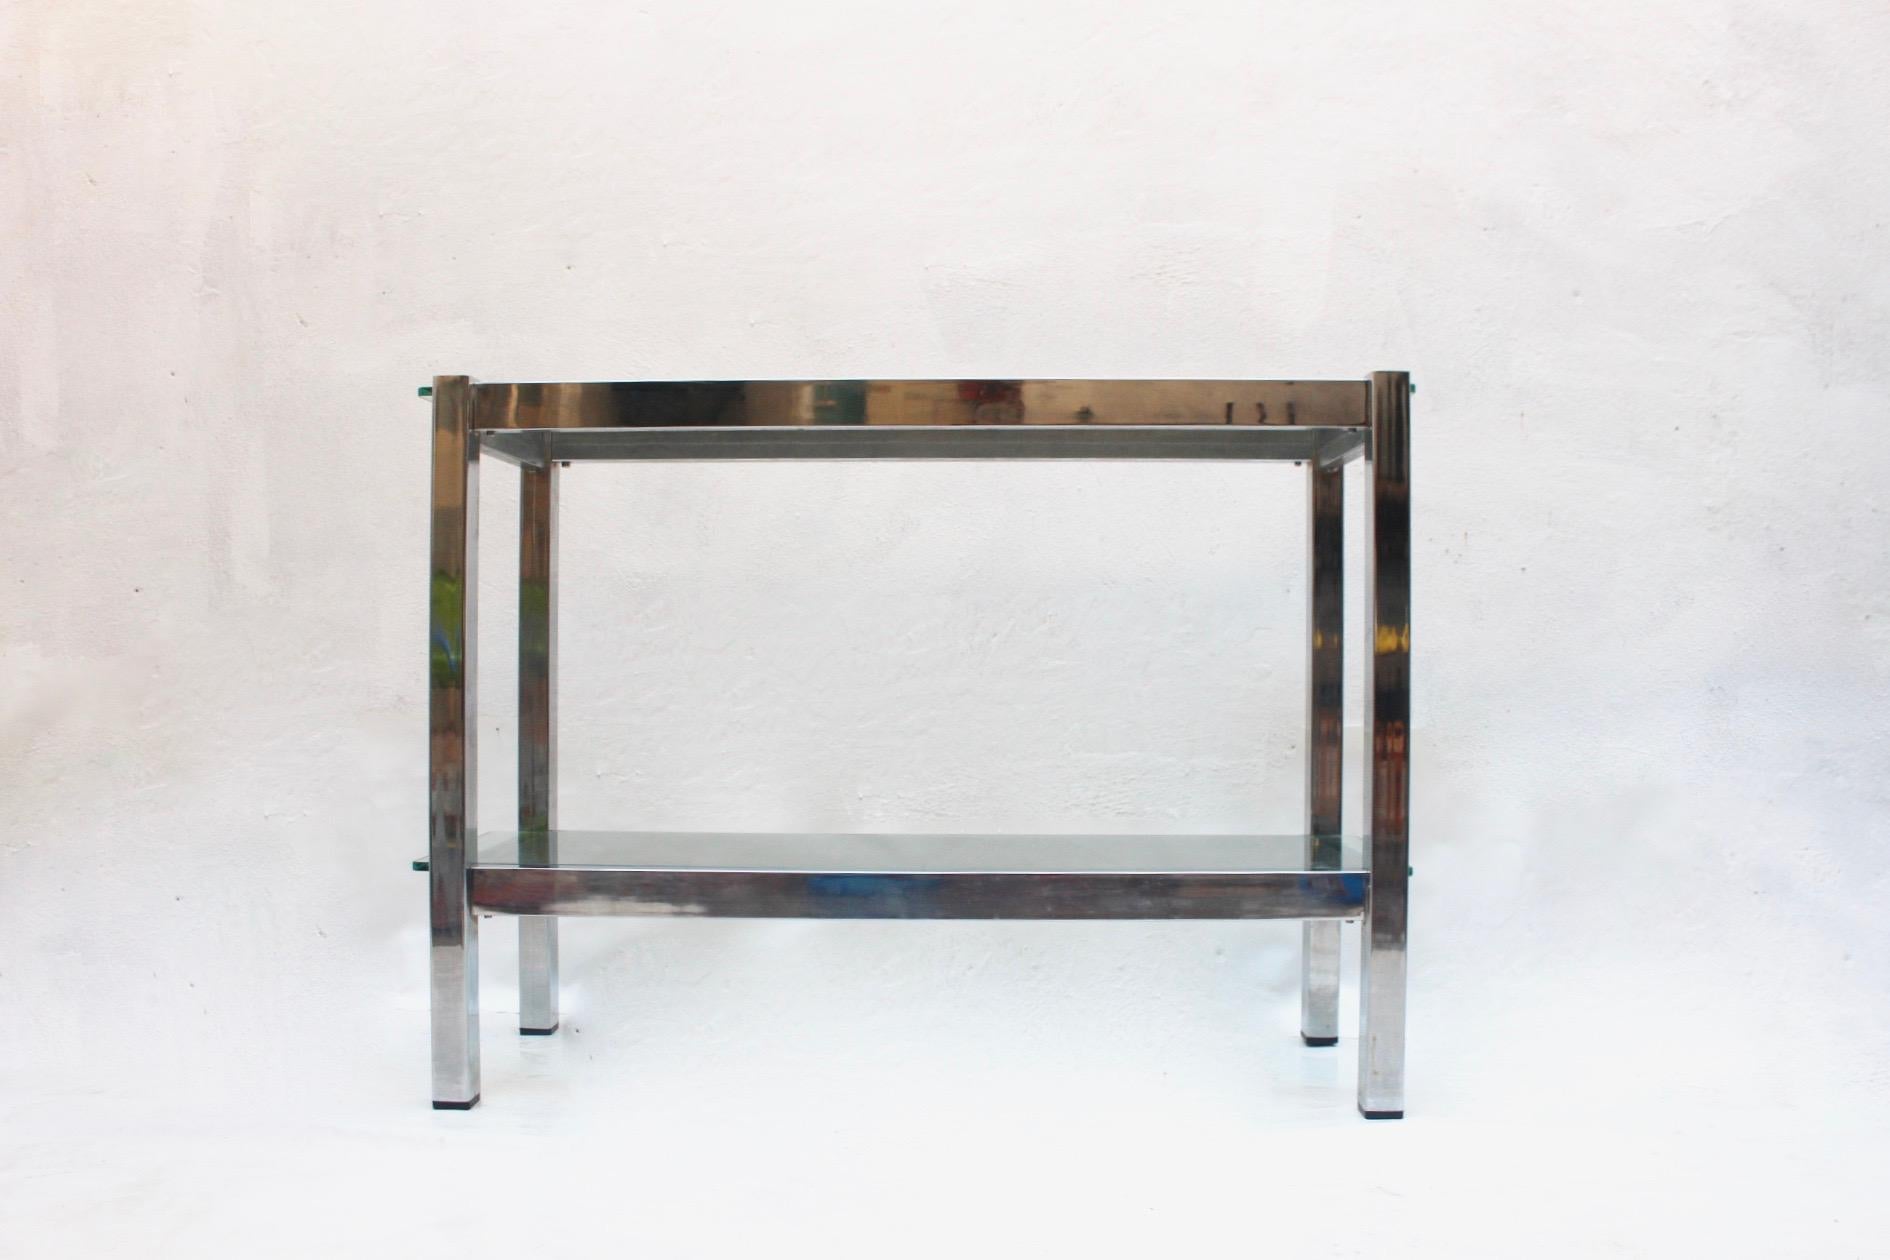 Minimalist chrome 2-tiered glass console table, Italy, 1970s.
  